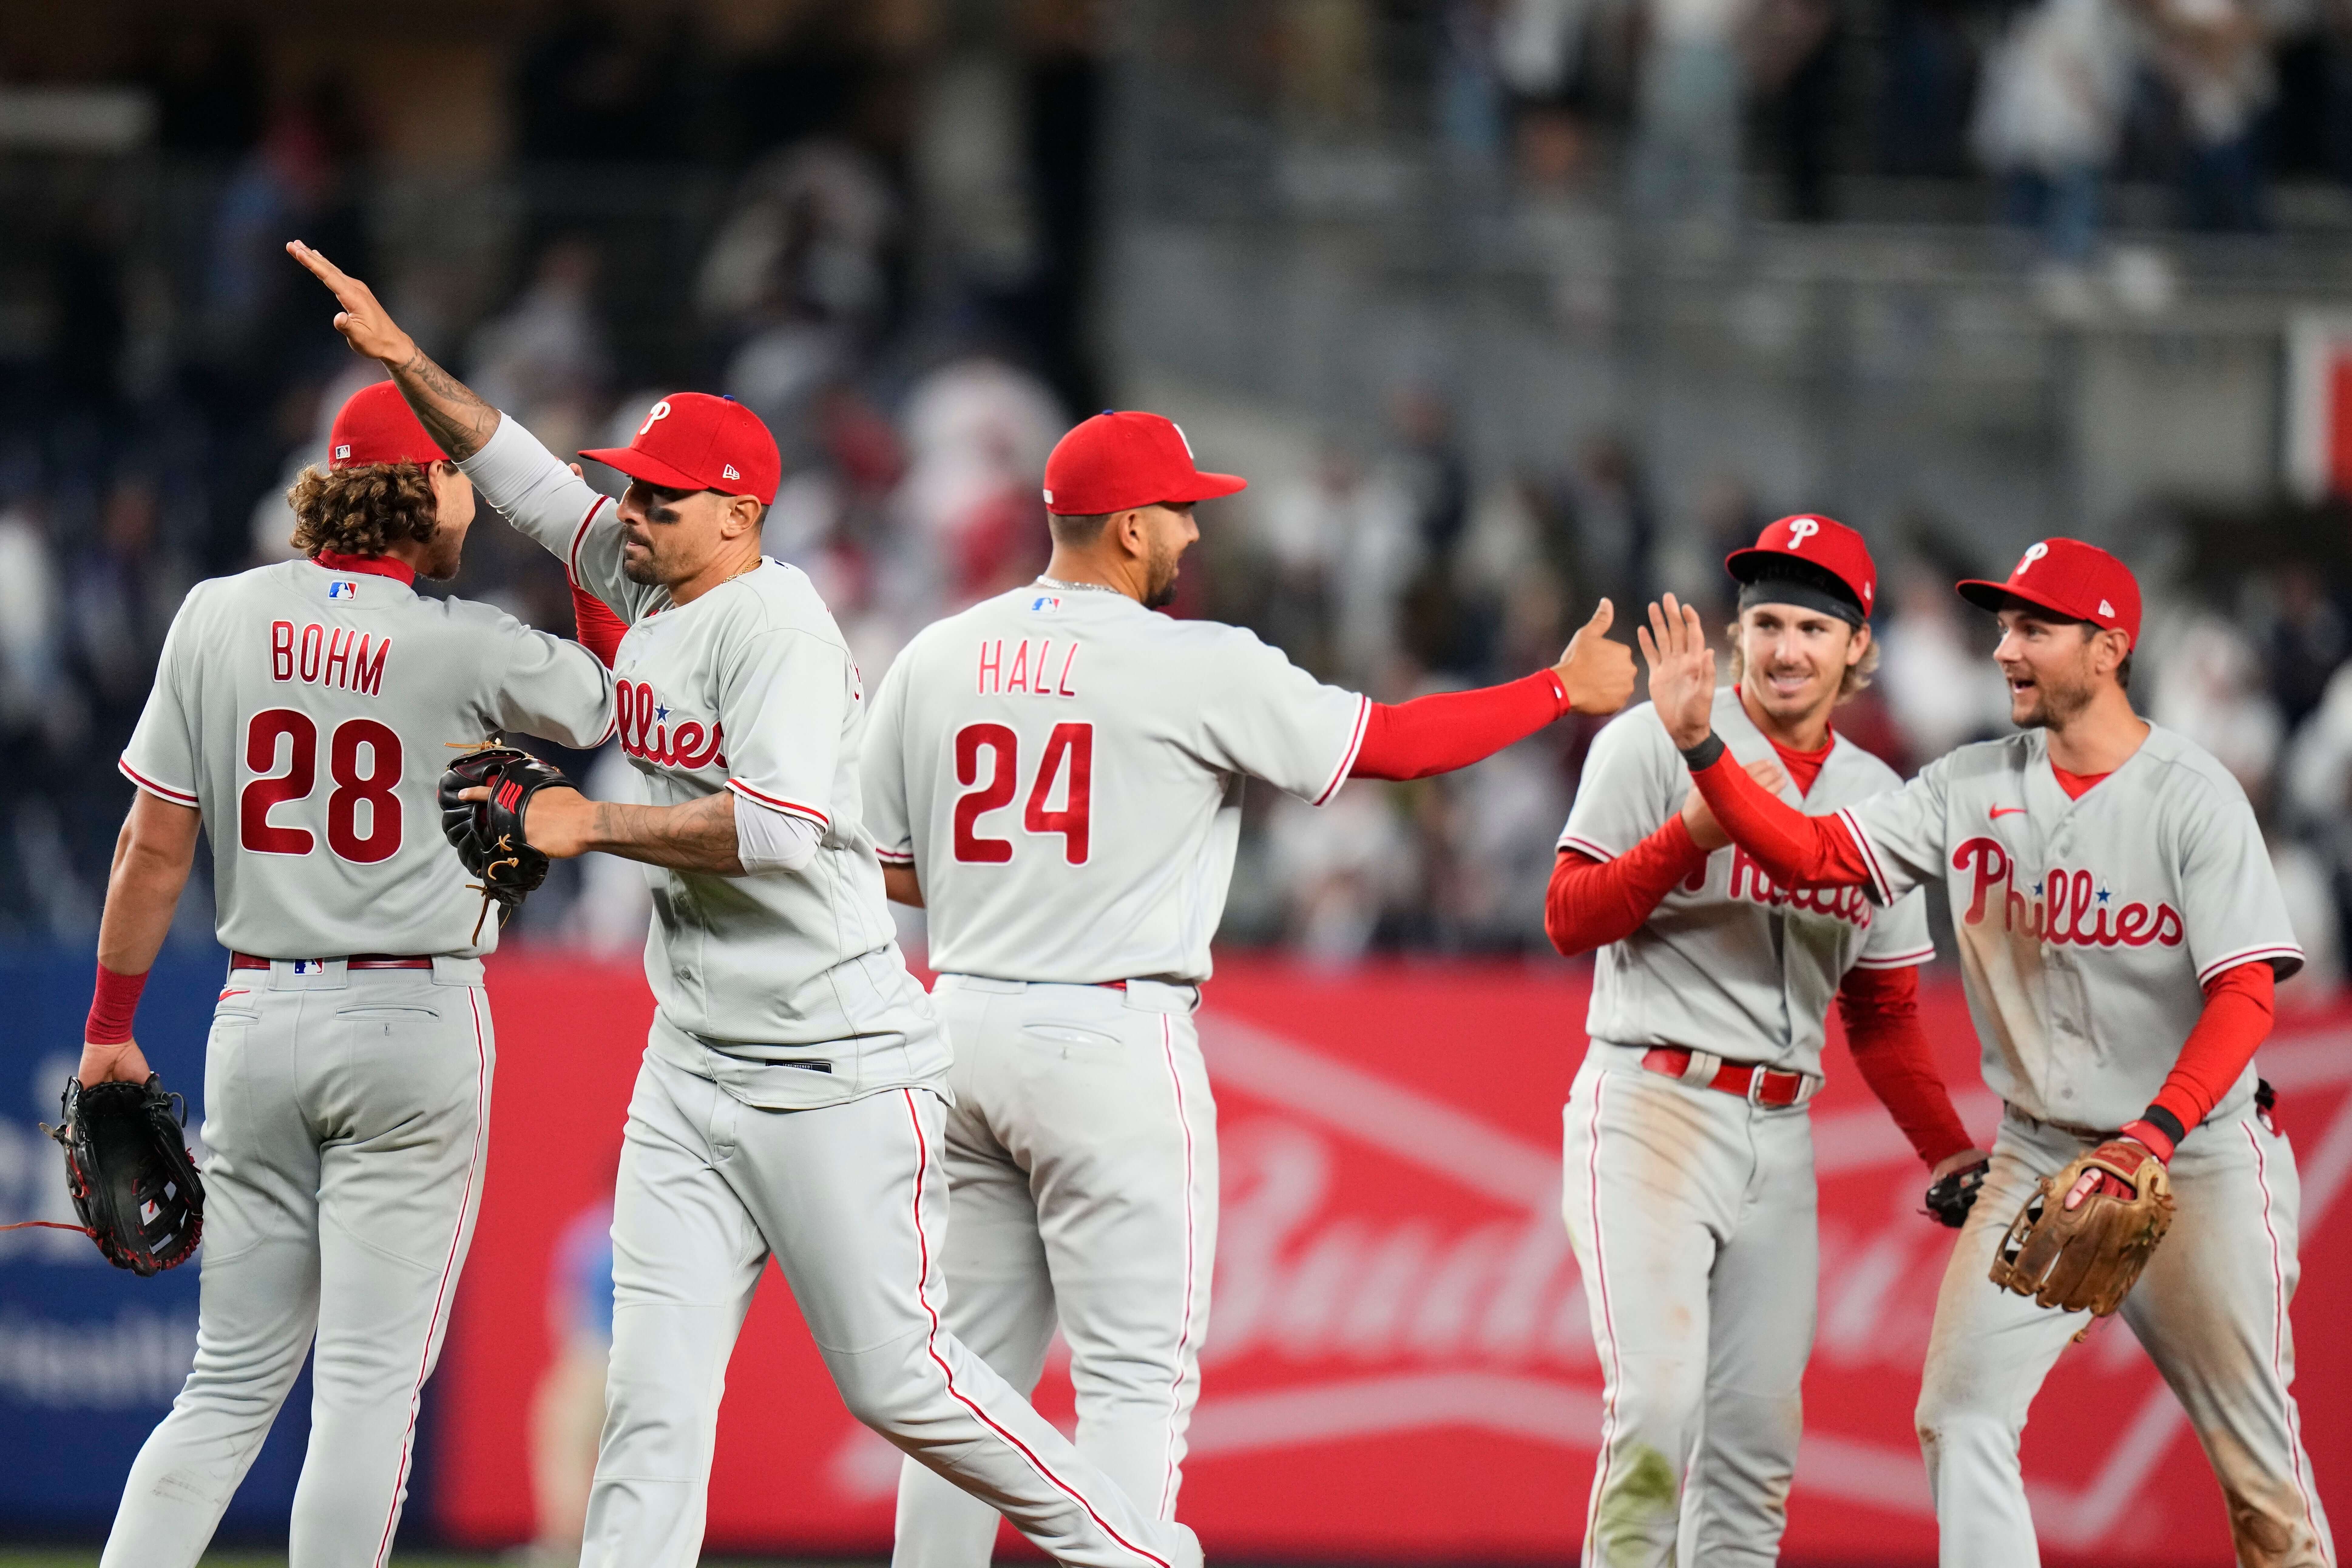 Photos of the Yankees besting the Phillies 5-2